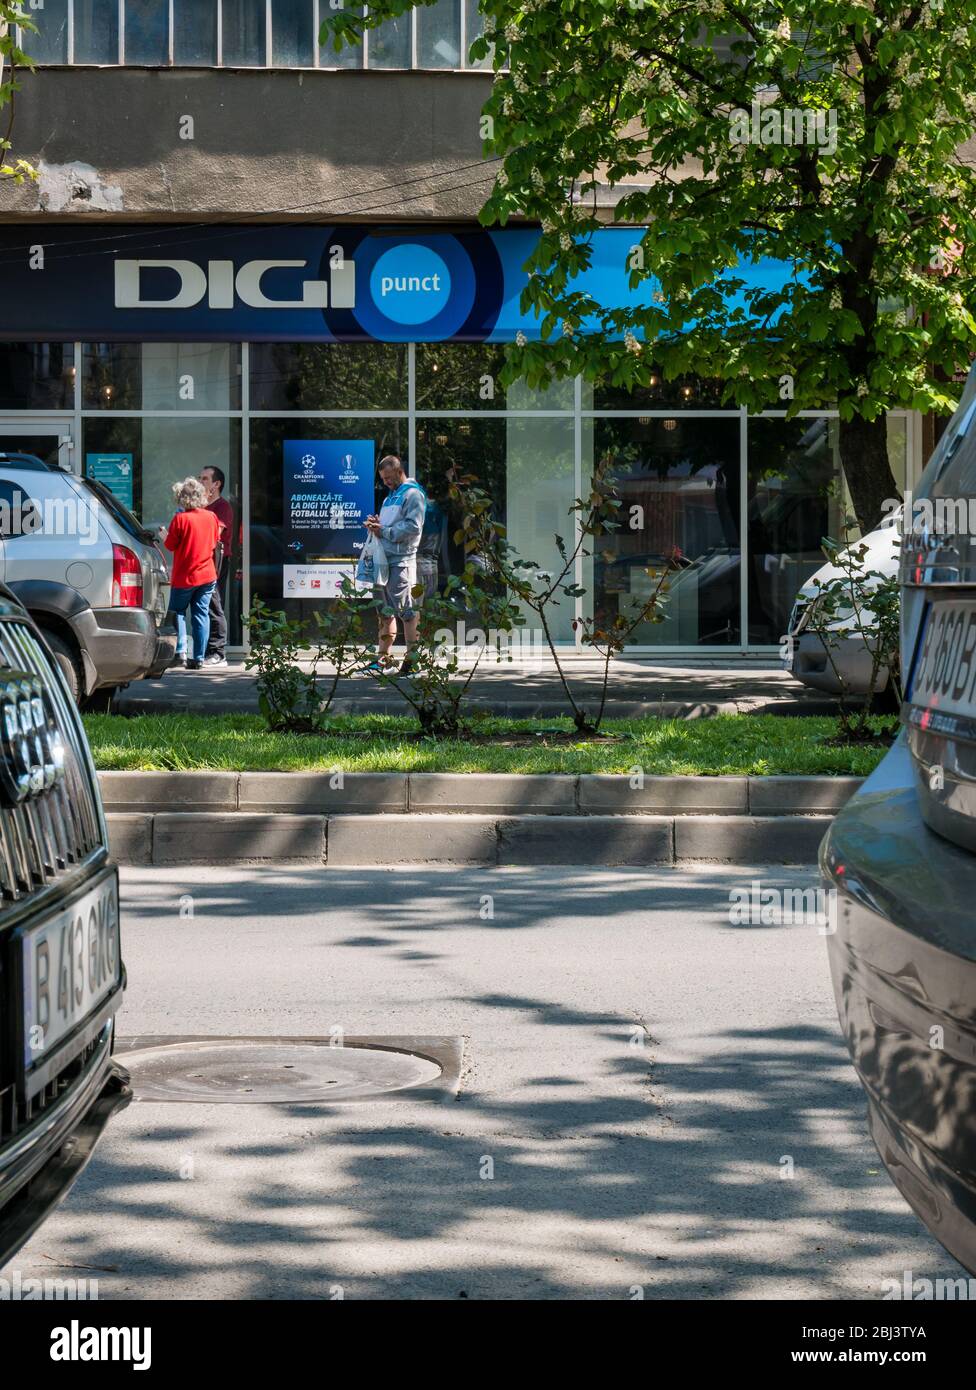 Bucharest/Romania – 04.27.2020: Digi Romania pay point belonging to RDS/RCS the largest cable and satellite television company in Romania. Stock Photo